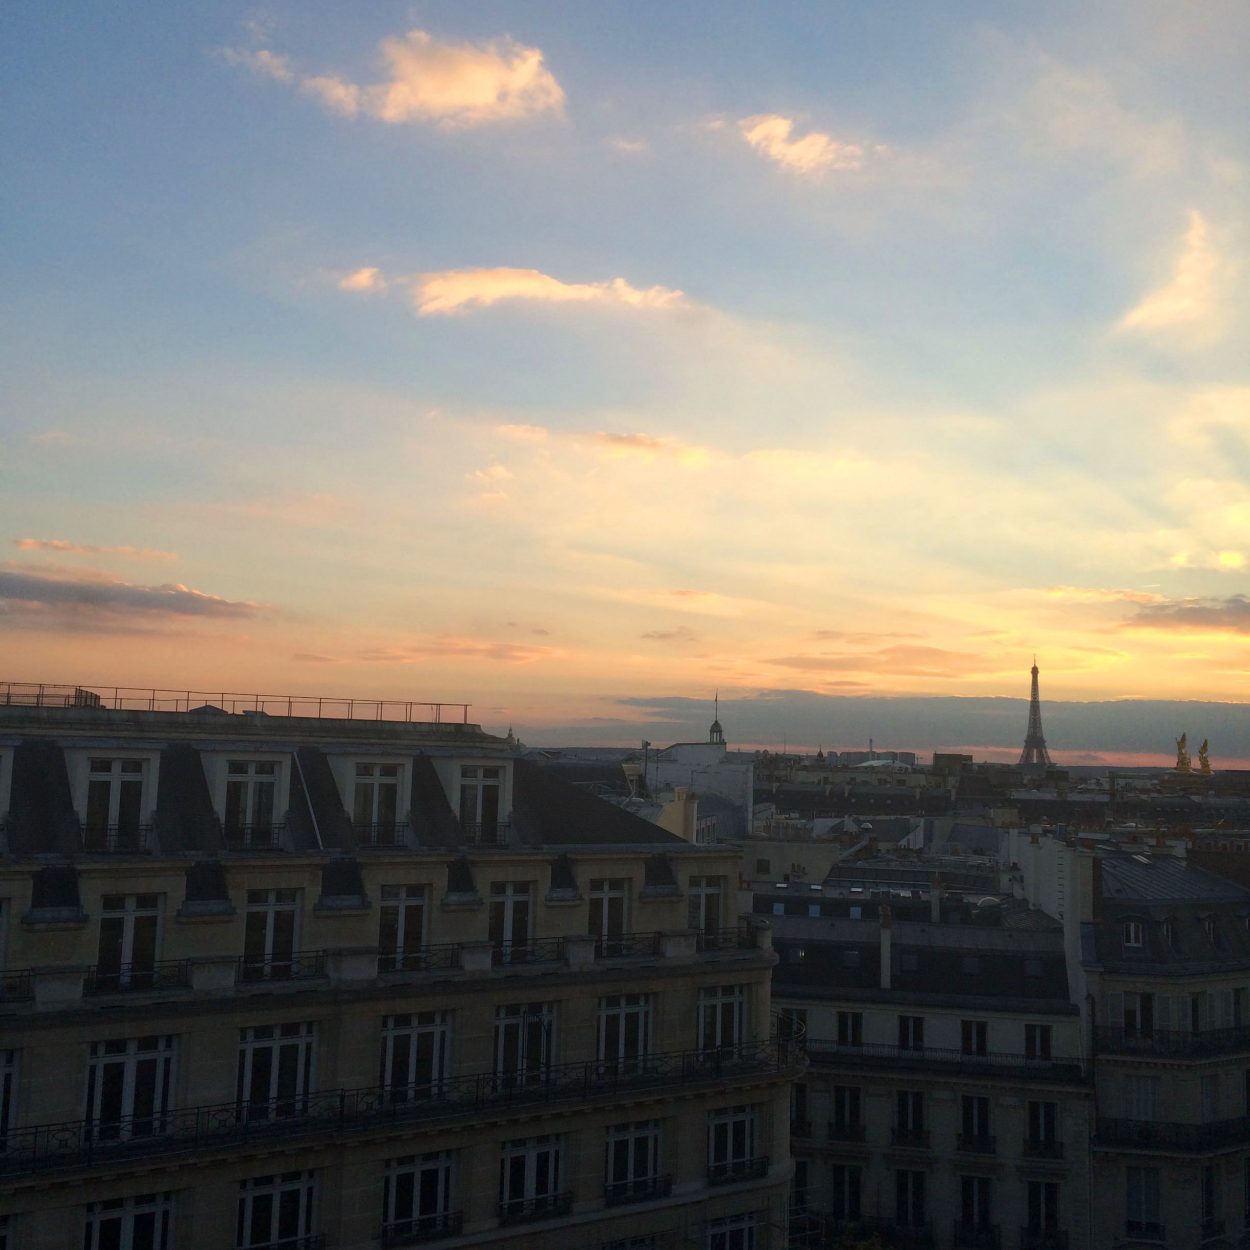 Parisian rooftops at sunset with the Eiffel Tower in the background